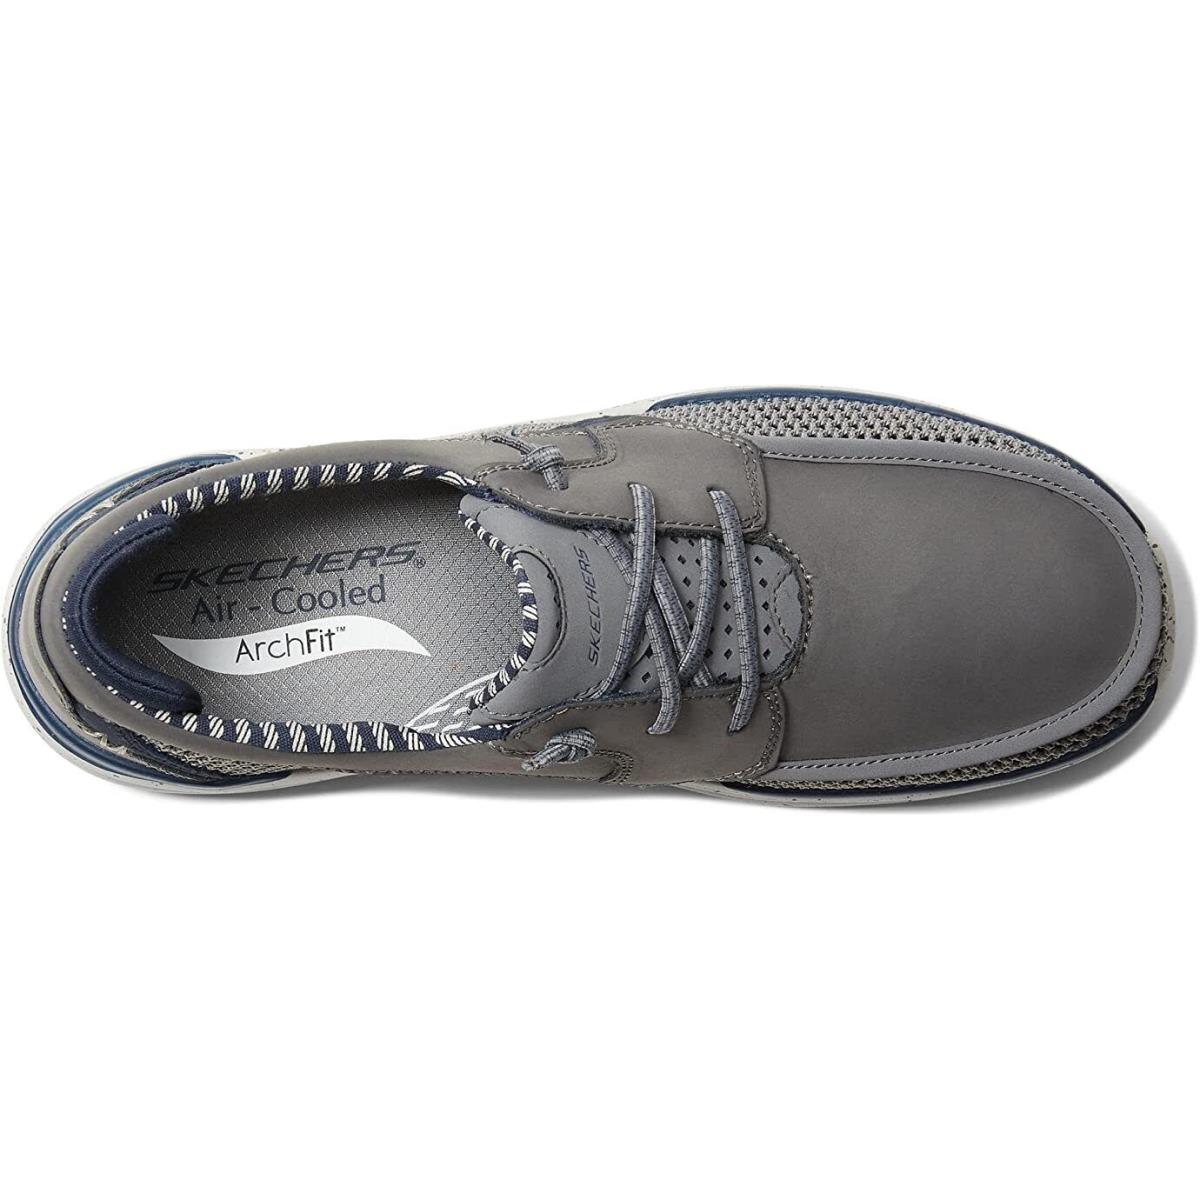 Skechers shoes Melo Waymer - Charcoal 0